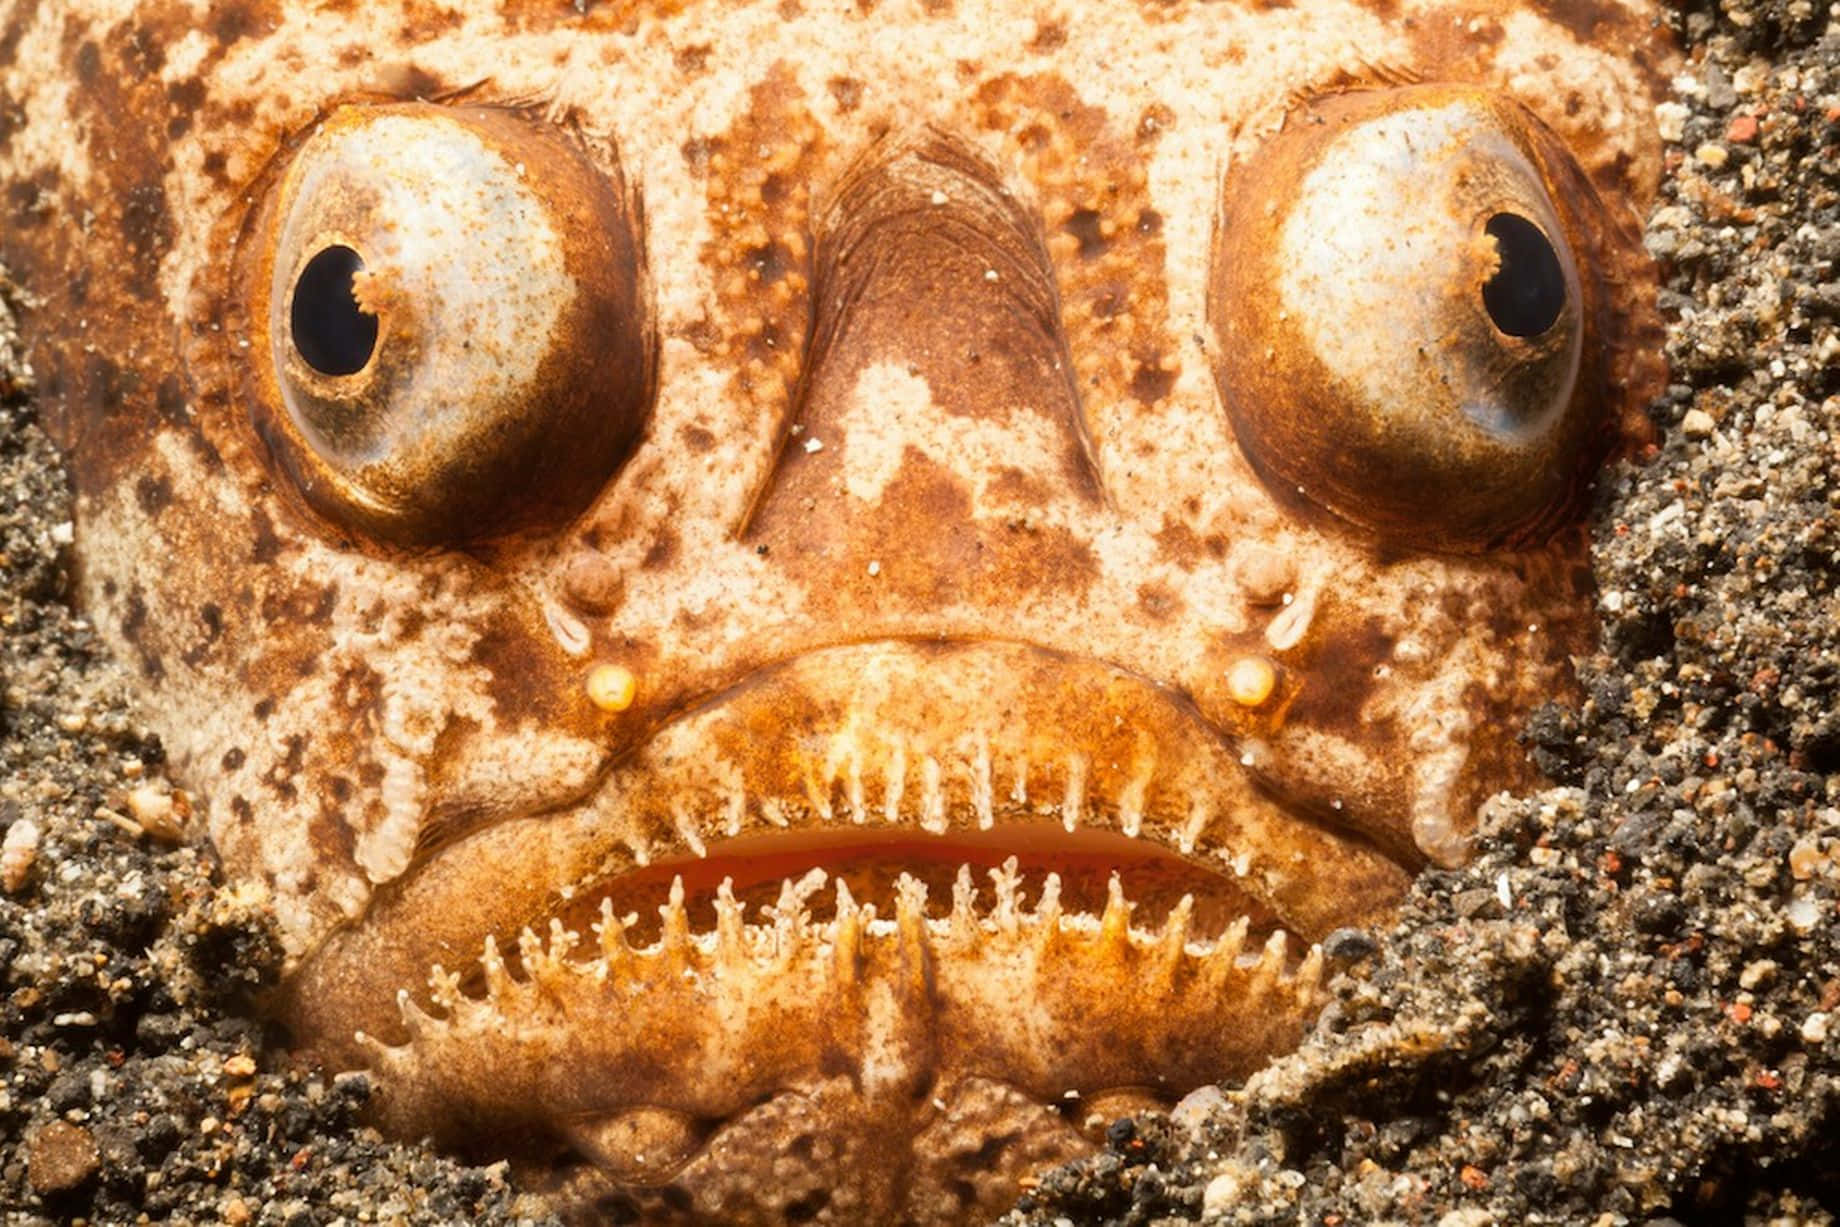 A Fish With A Big Mouth Is In The Sand